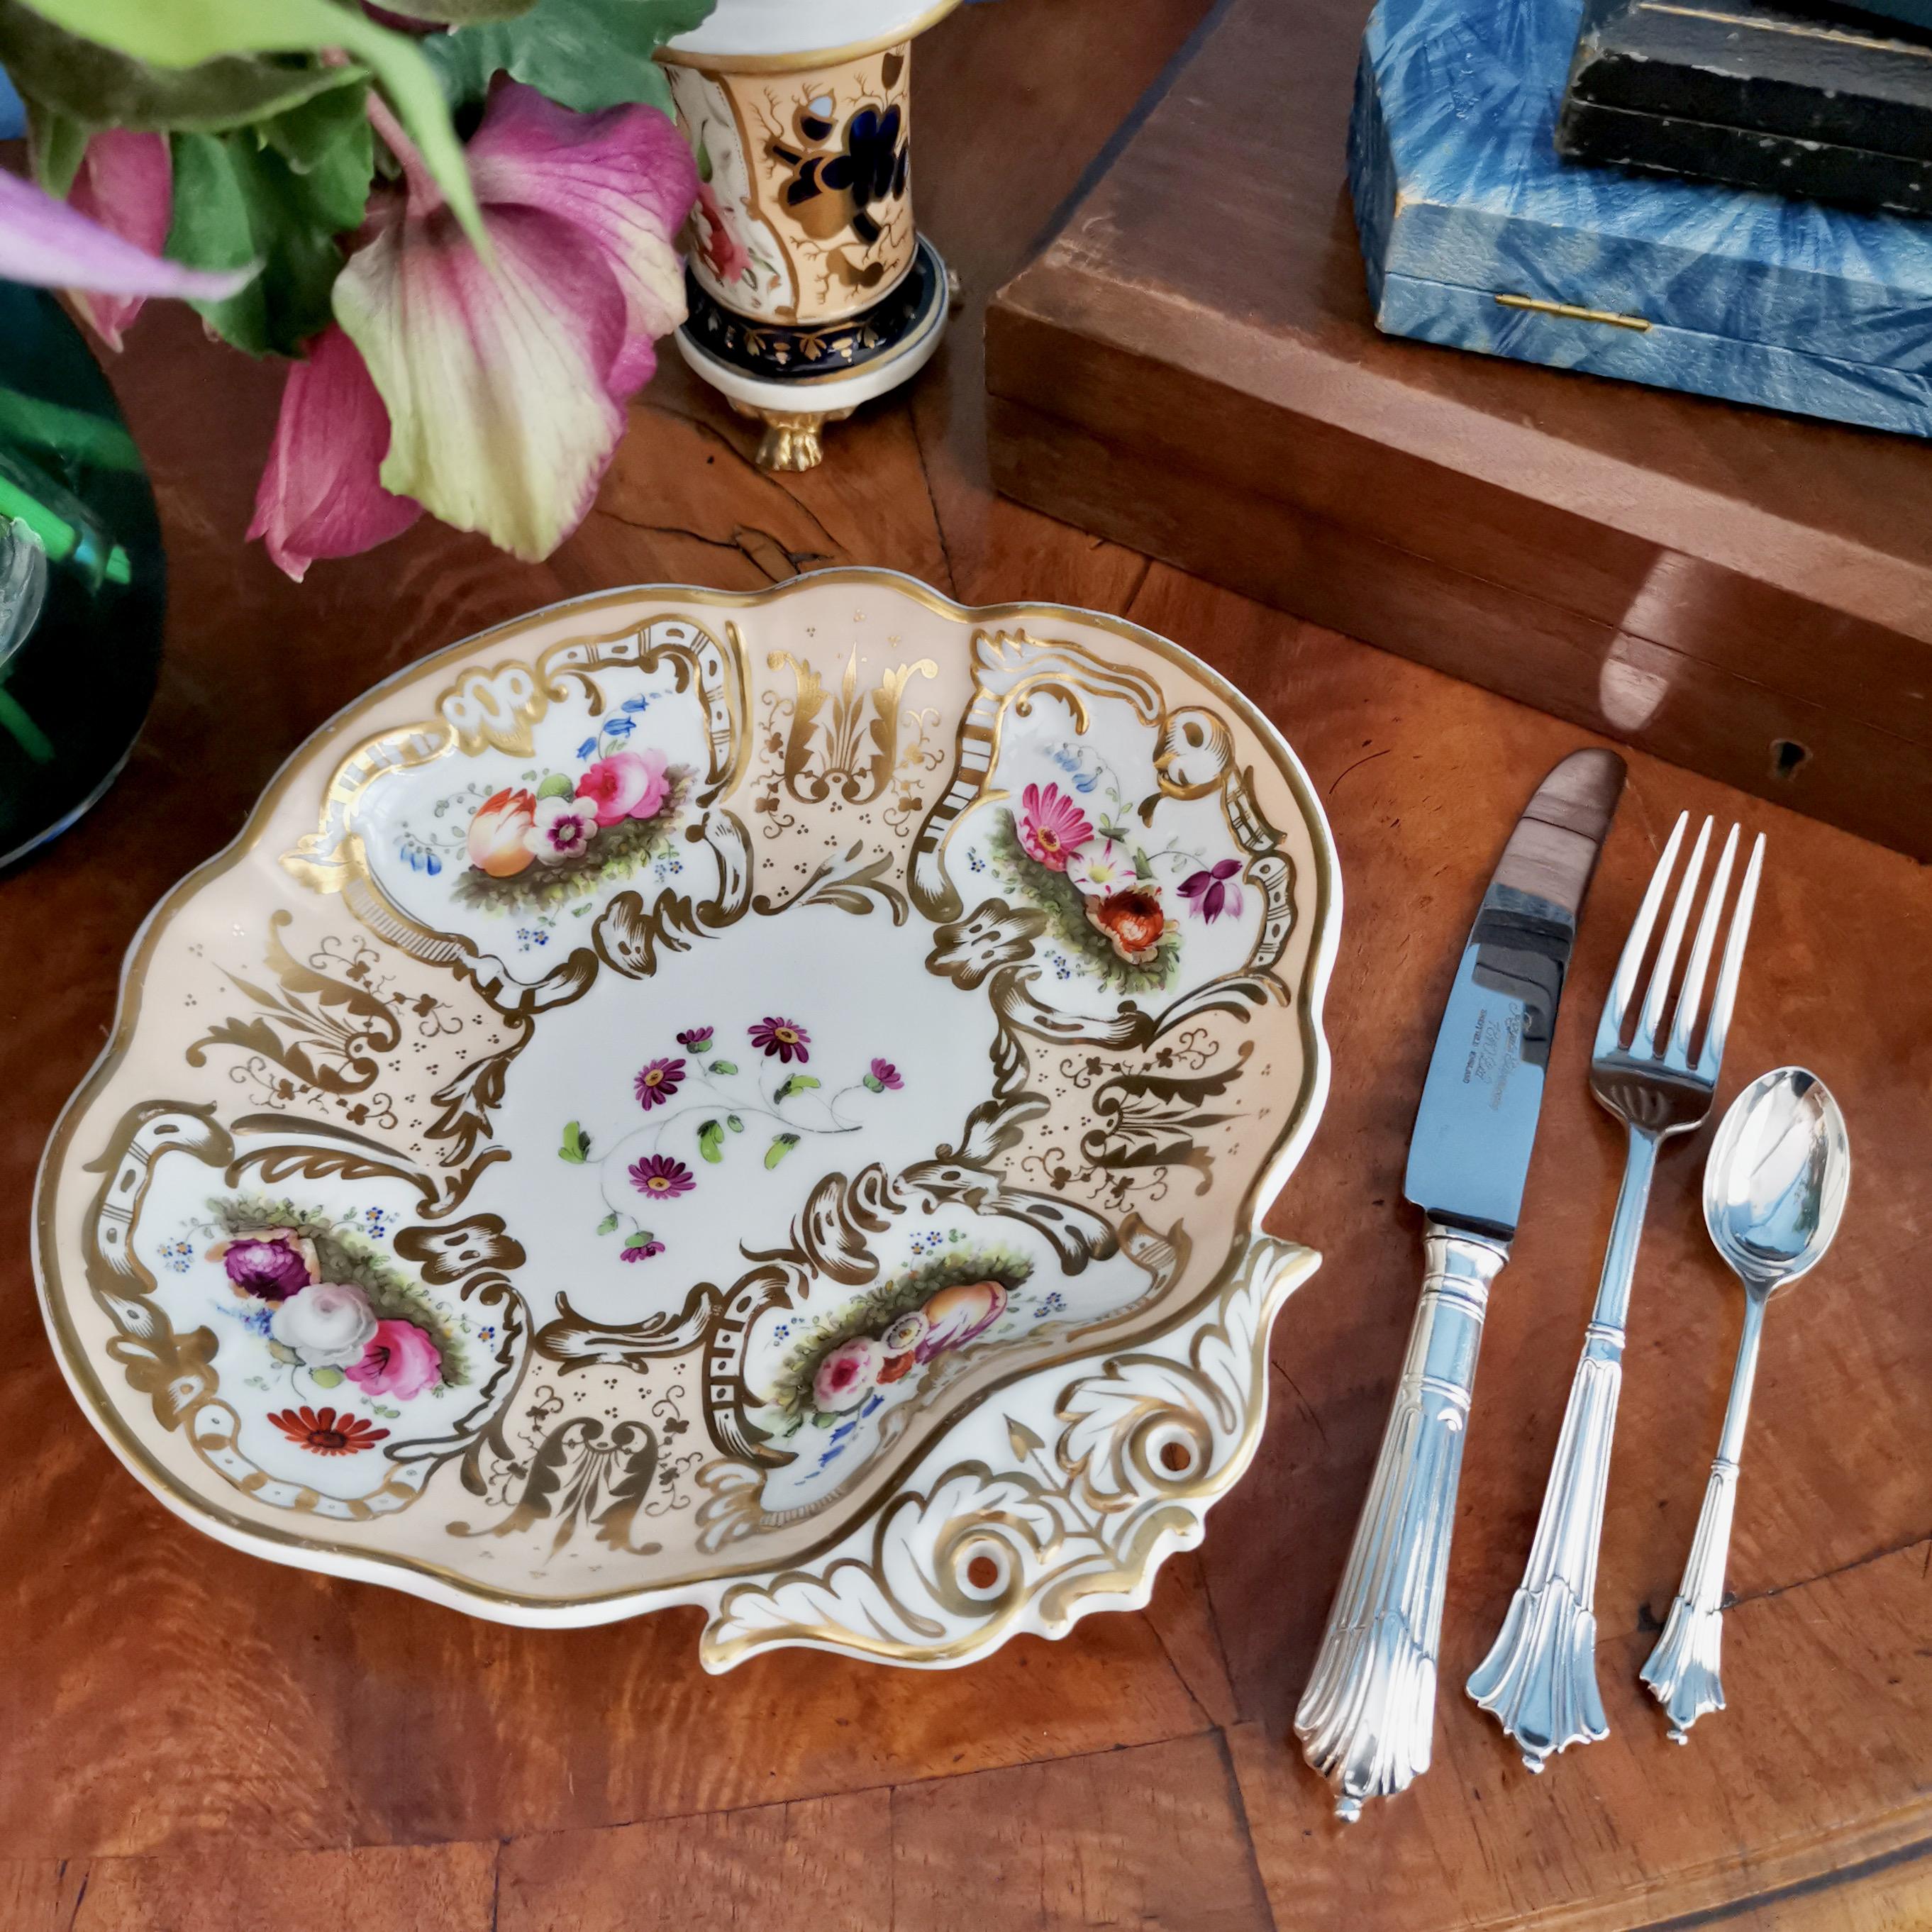 This is a beautiful dessert serving dish made by Davenport circa 1830. The dish is decorated in a beautiful salmon ground with gilt and hand painted flowers, and has a very characteristically moulded handle.

Davenport was one of the pioneers of